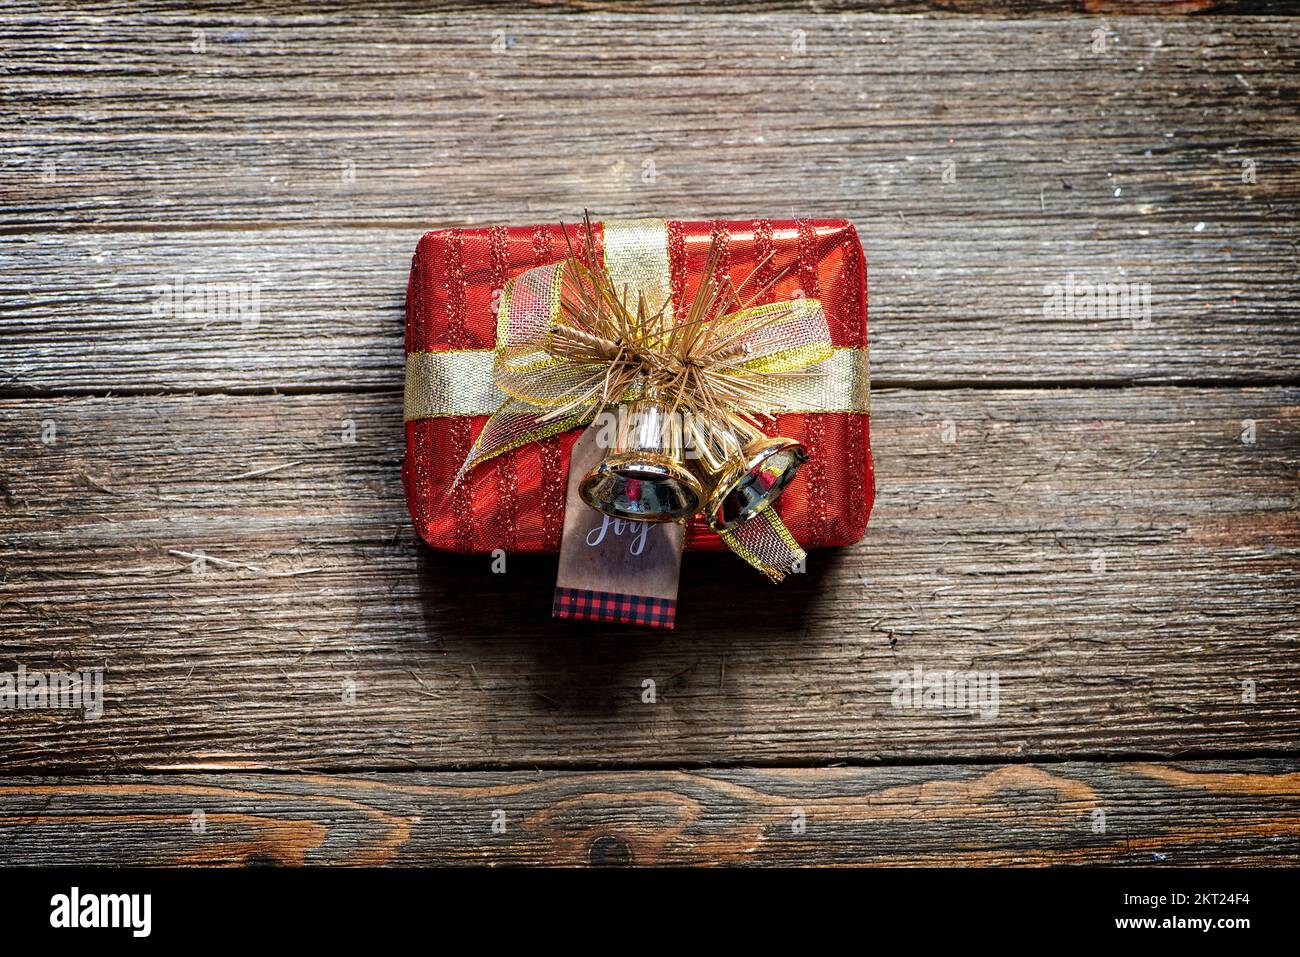 Small red and gold gift box on a rustic wooden background, farmhouse style. Stock Photo